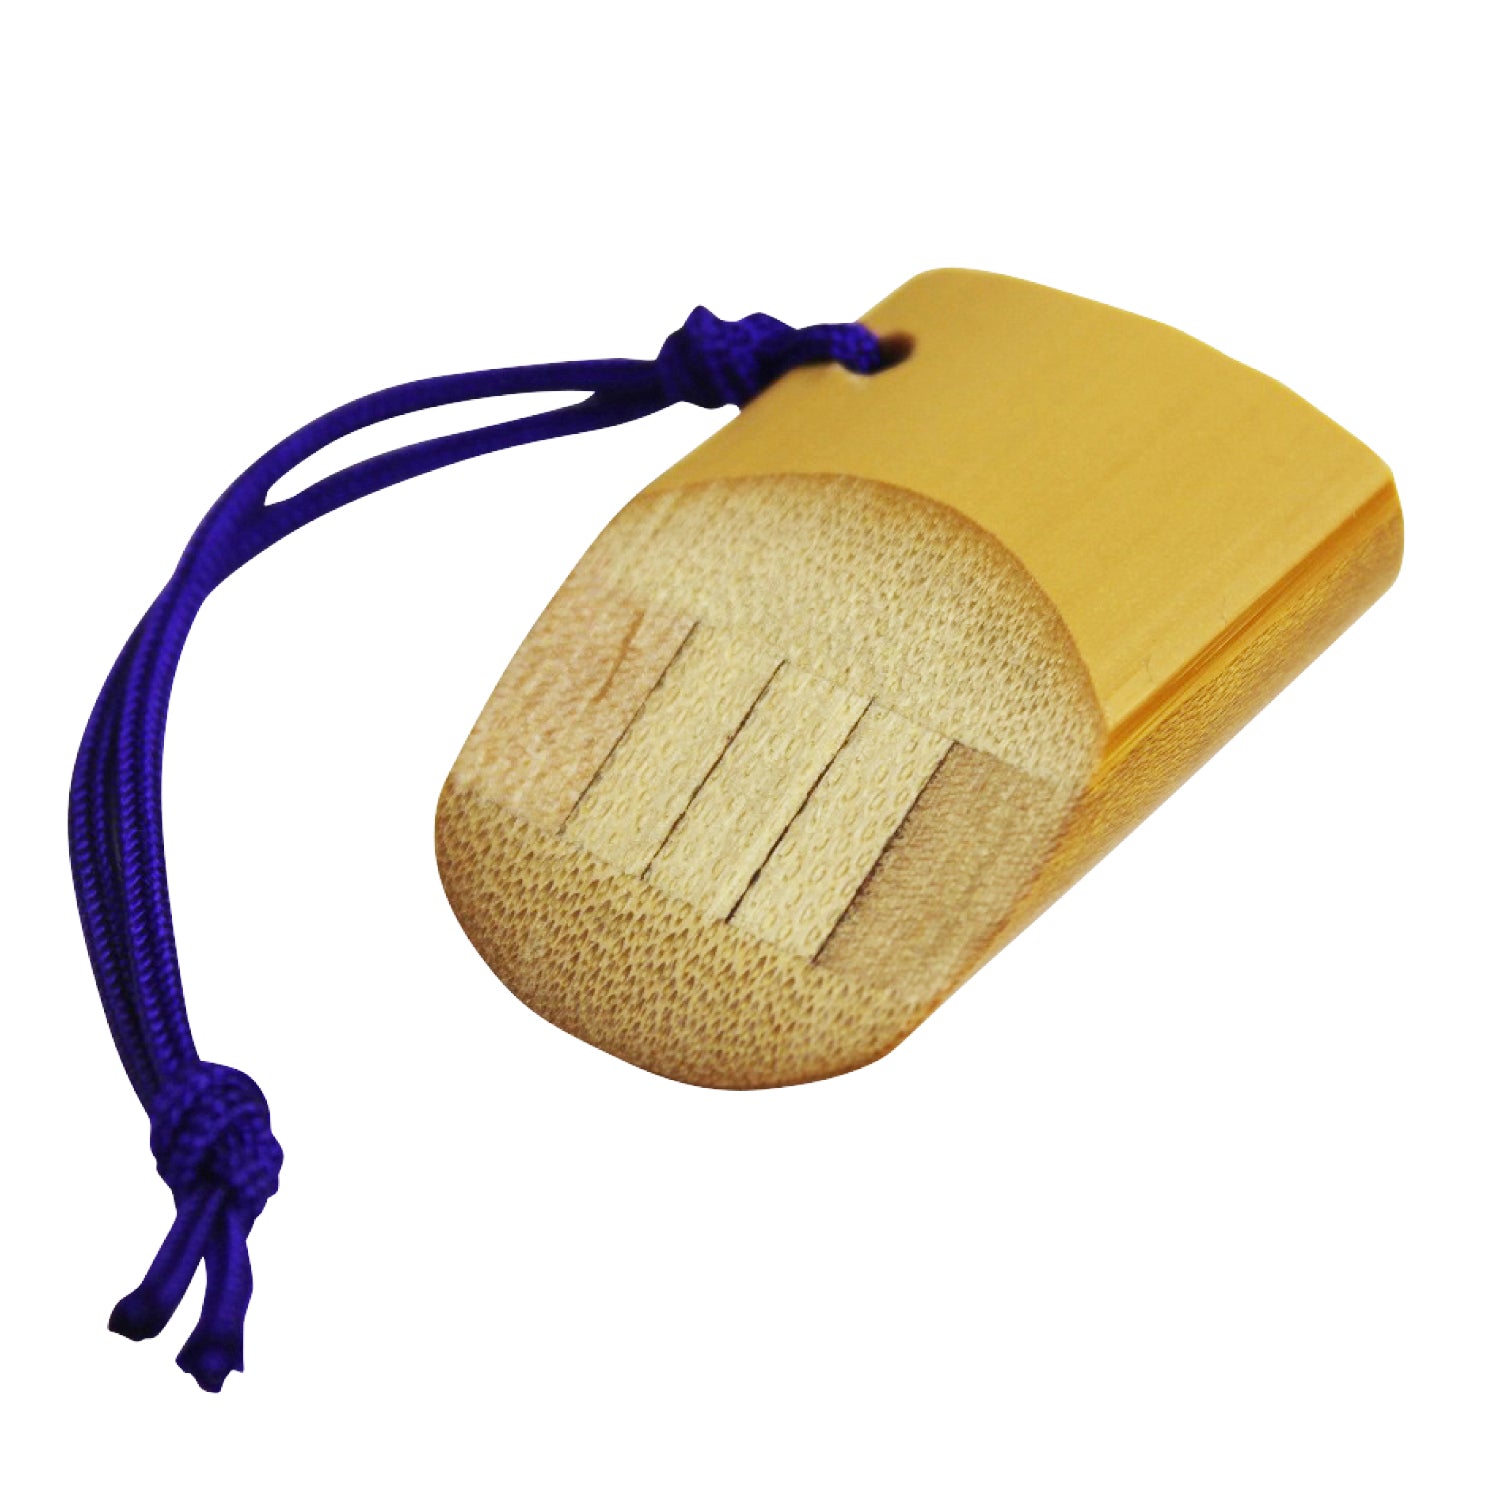 【L-131】Netsuke strap made from bamboo bow(Diagonal cutting) - 根付 竹弓製 斜め